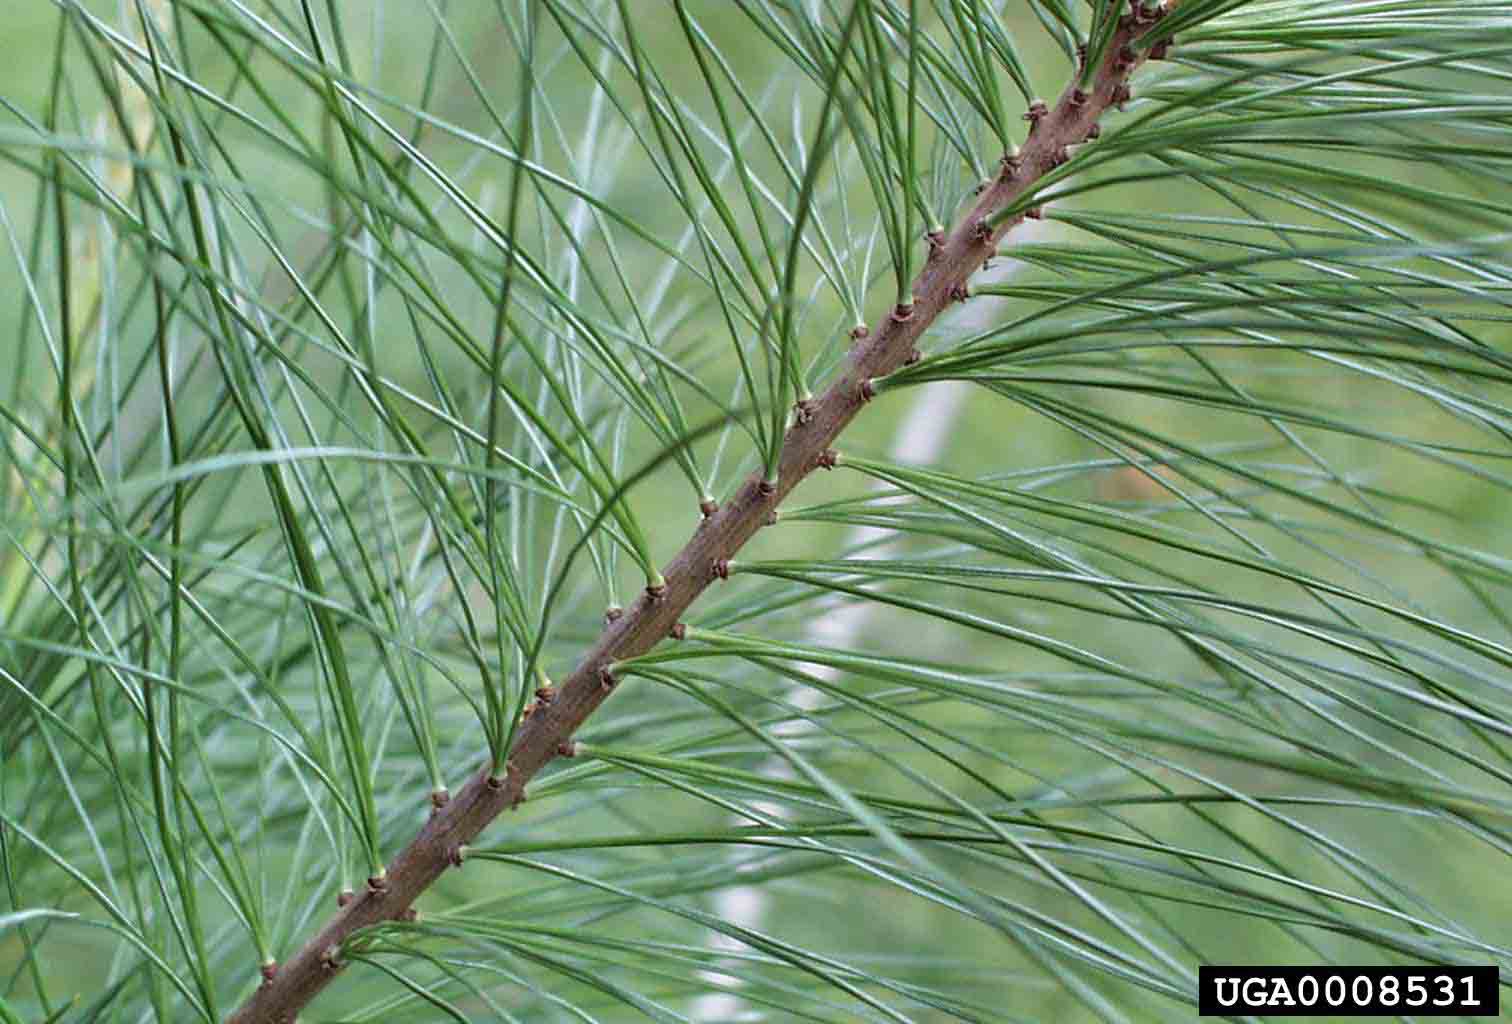 Eastern white pine twig, with needles 3"-5" long